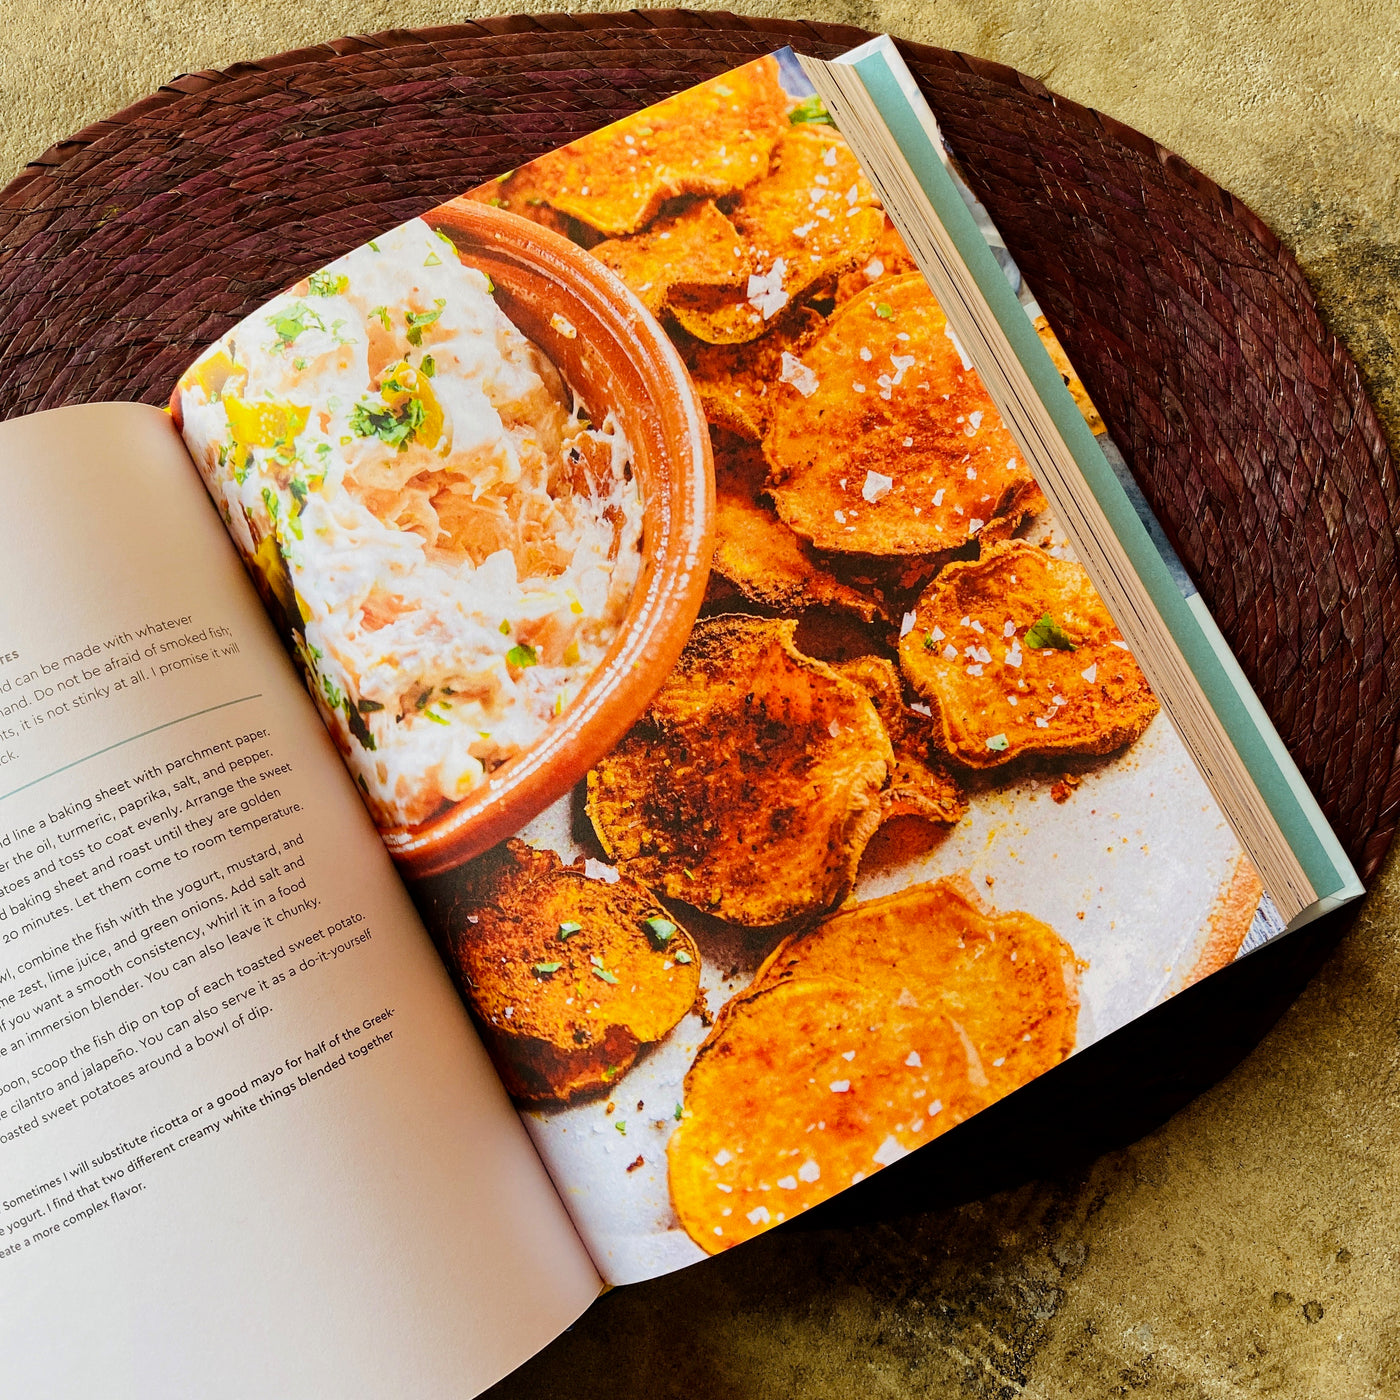 The Mexican Keto Cookbook - Authentic, Big-Flavor Recipes for Health and Longevity book interior page